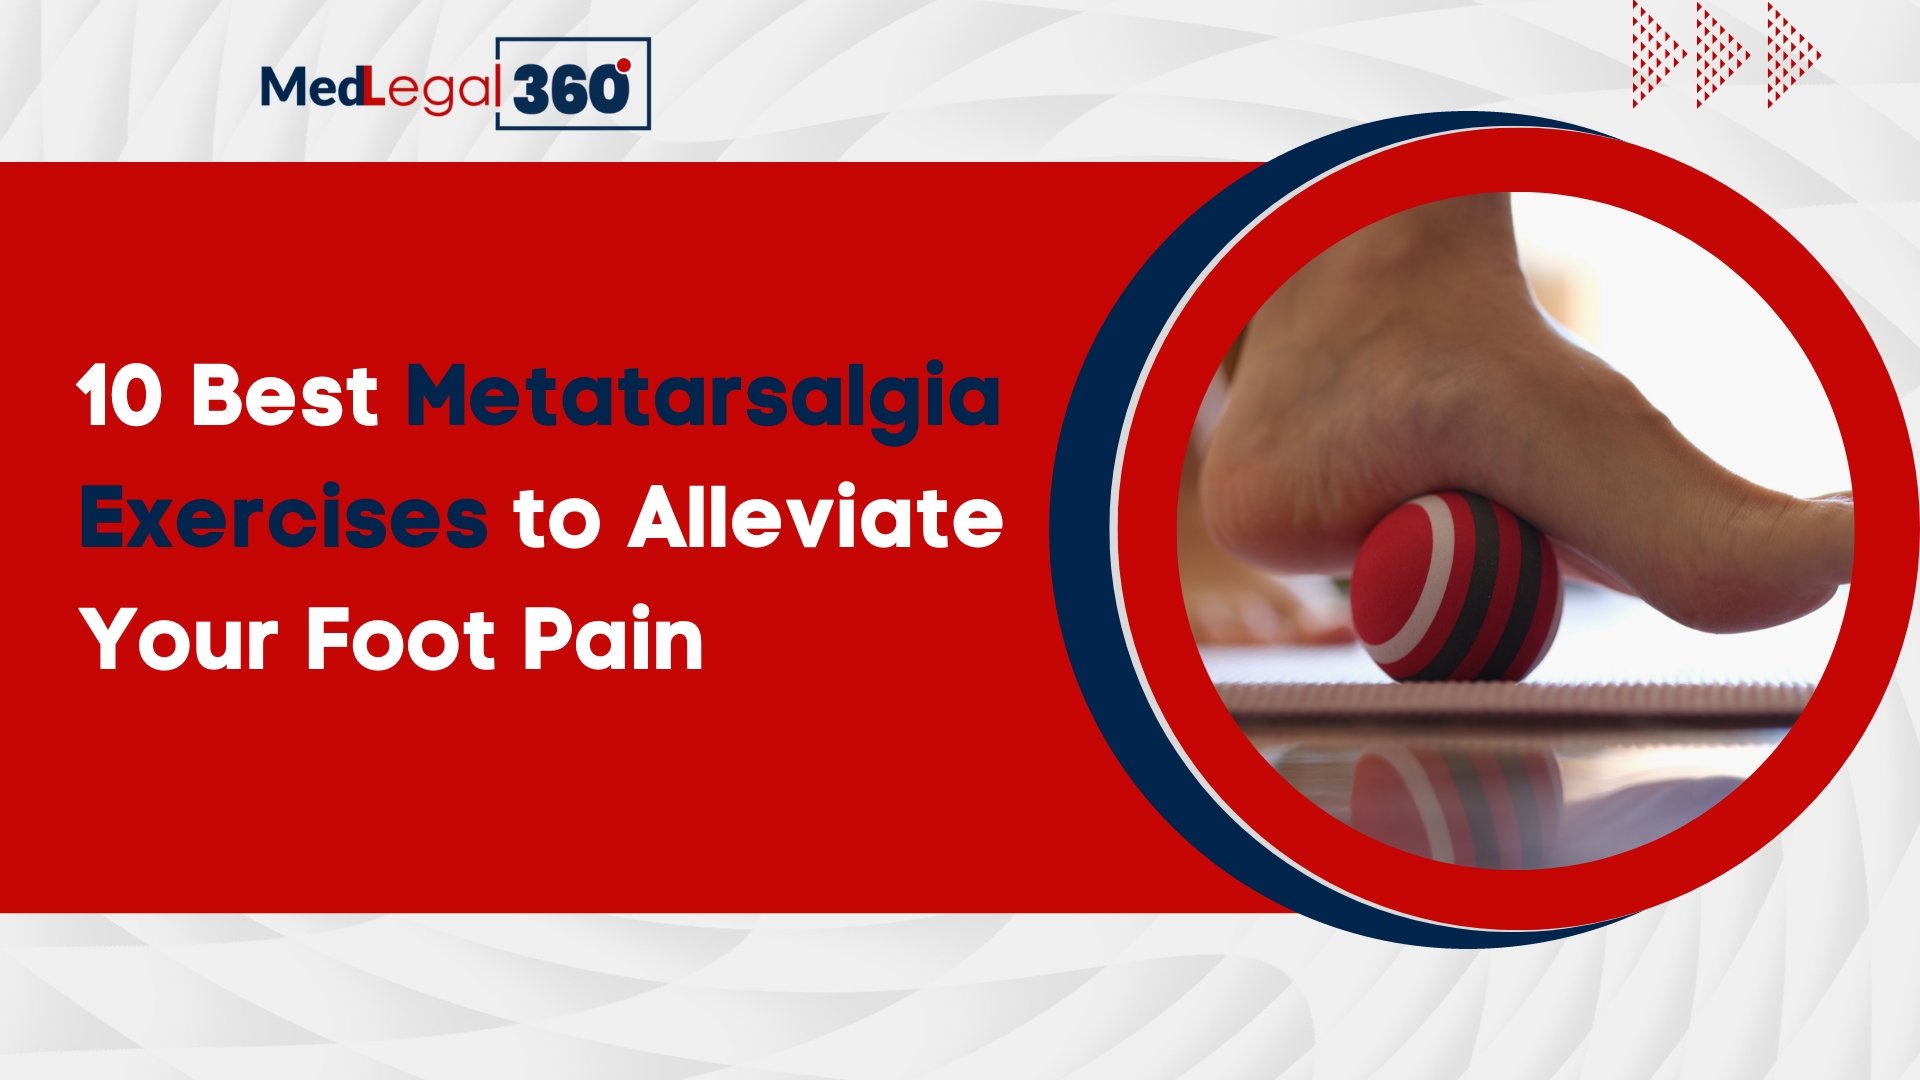 10 Best Metatarsalgia Exercises to Alleviate Your Foot Pain